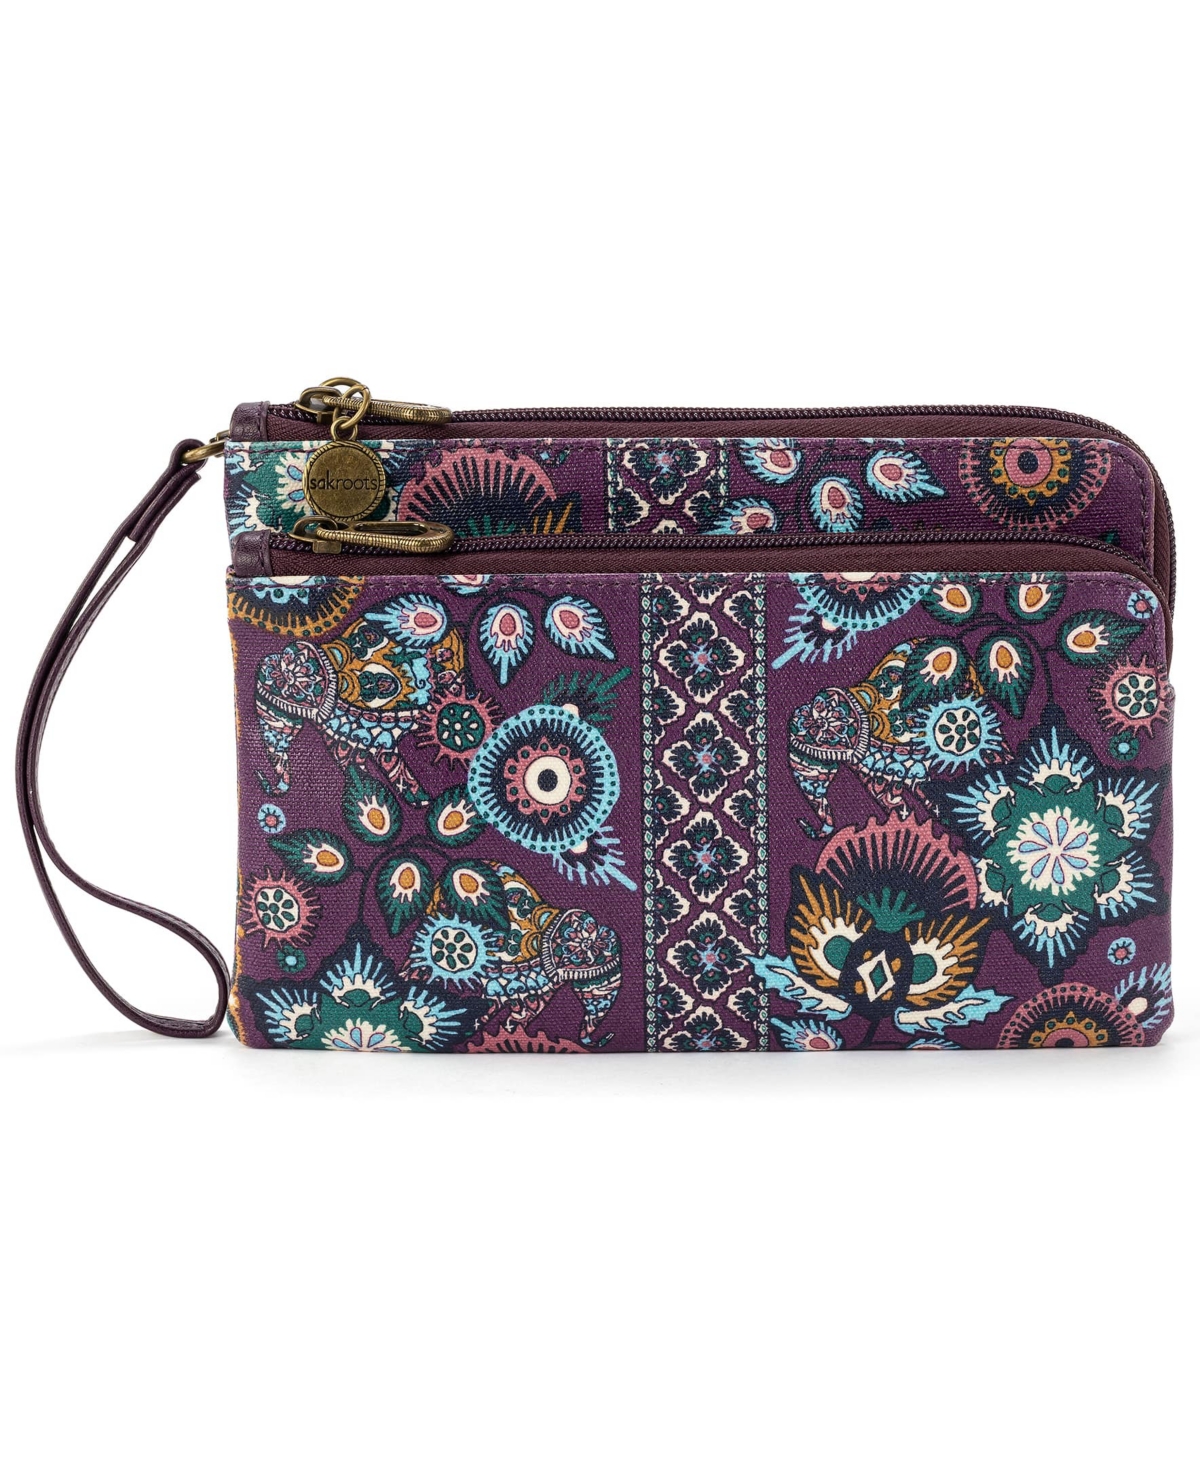 SAKROOTS TWILL CAMBRIA CONVERTIBLE CROSSBODY